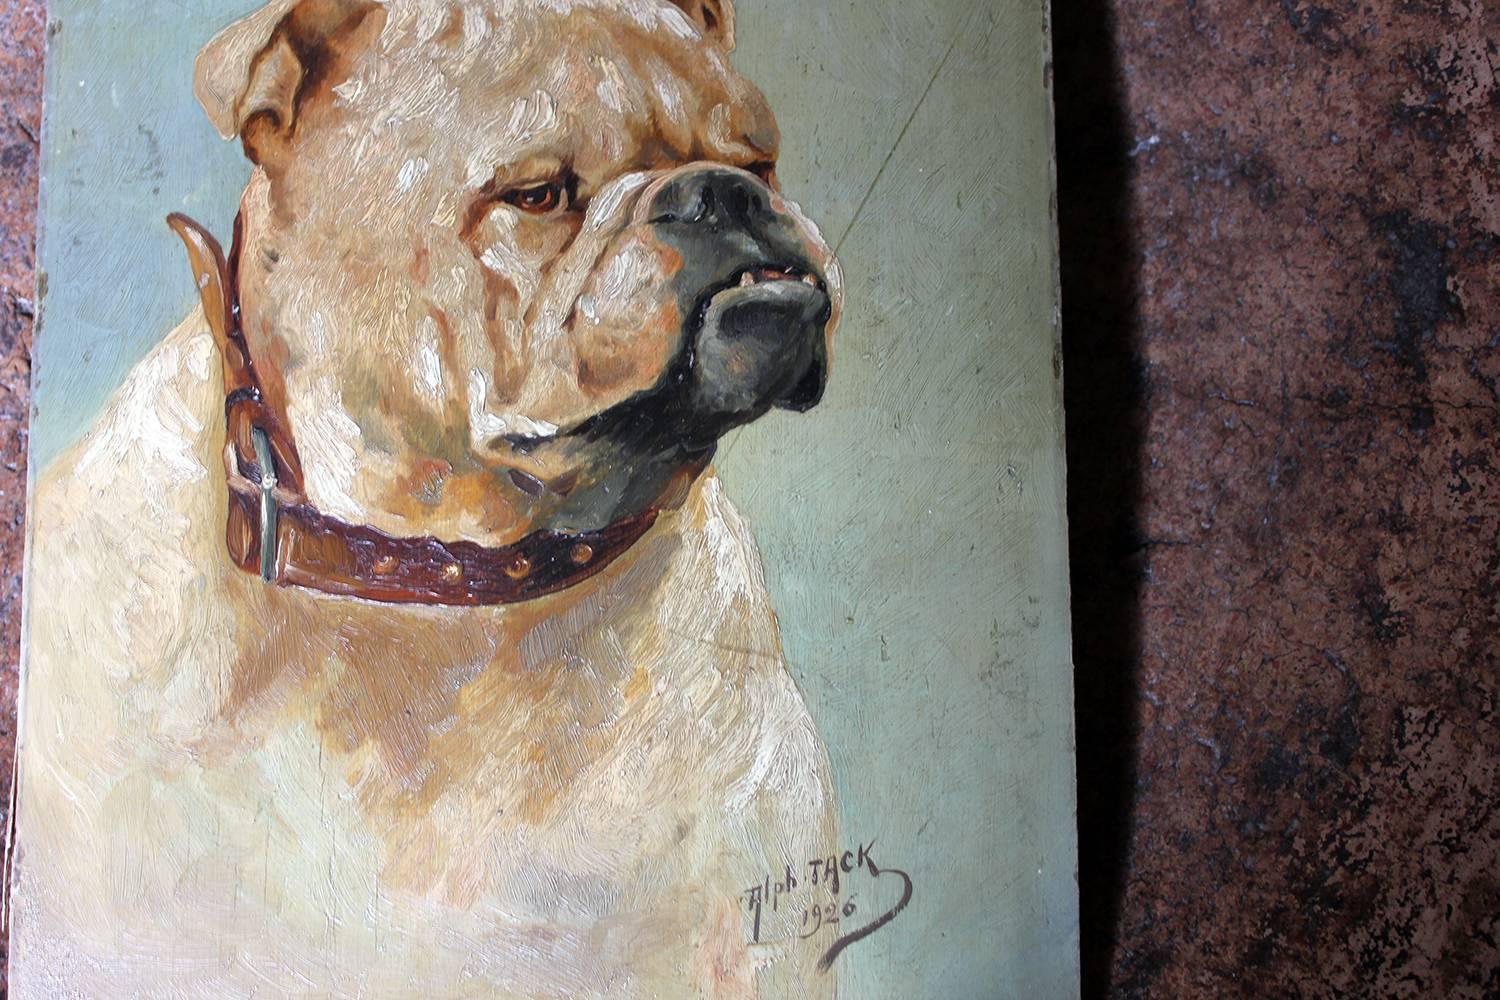 Hand-Painted Early 20th Century Oil on Panel Study of an English Bulldog, Alph Jack, 1926